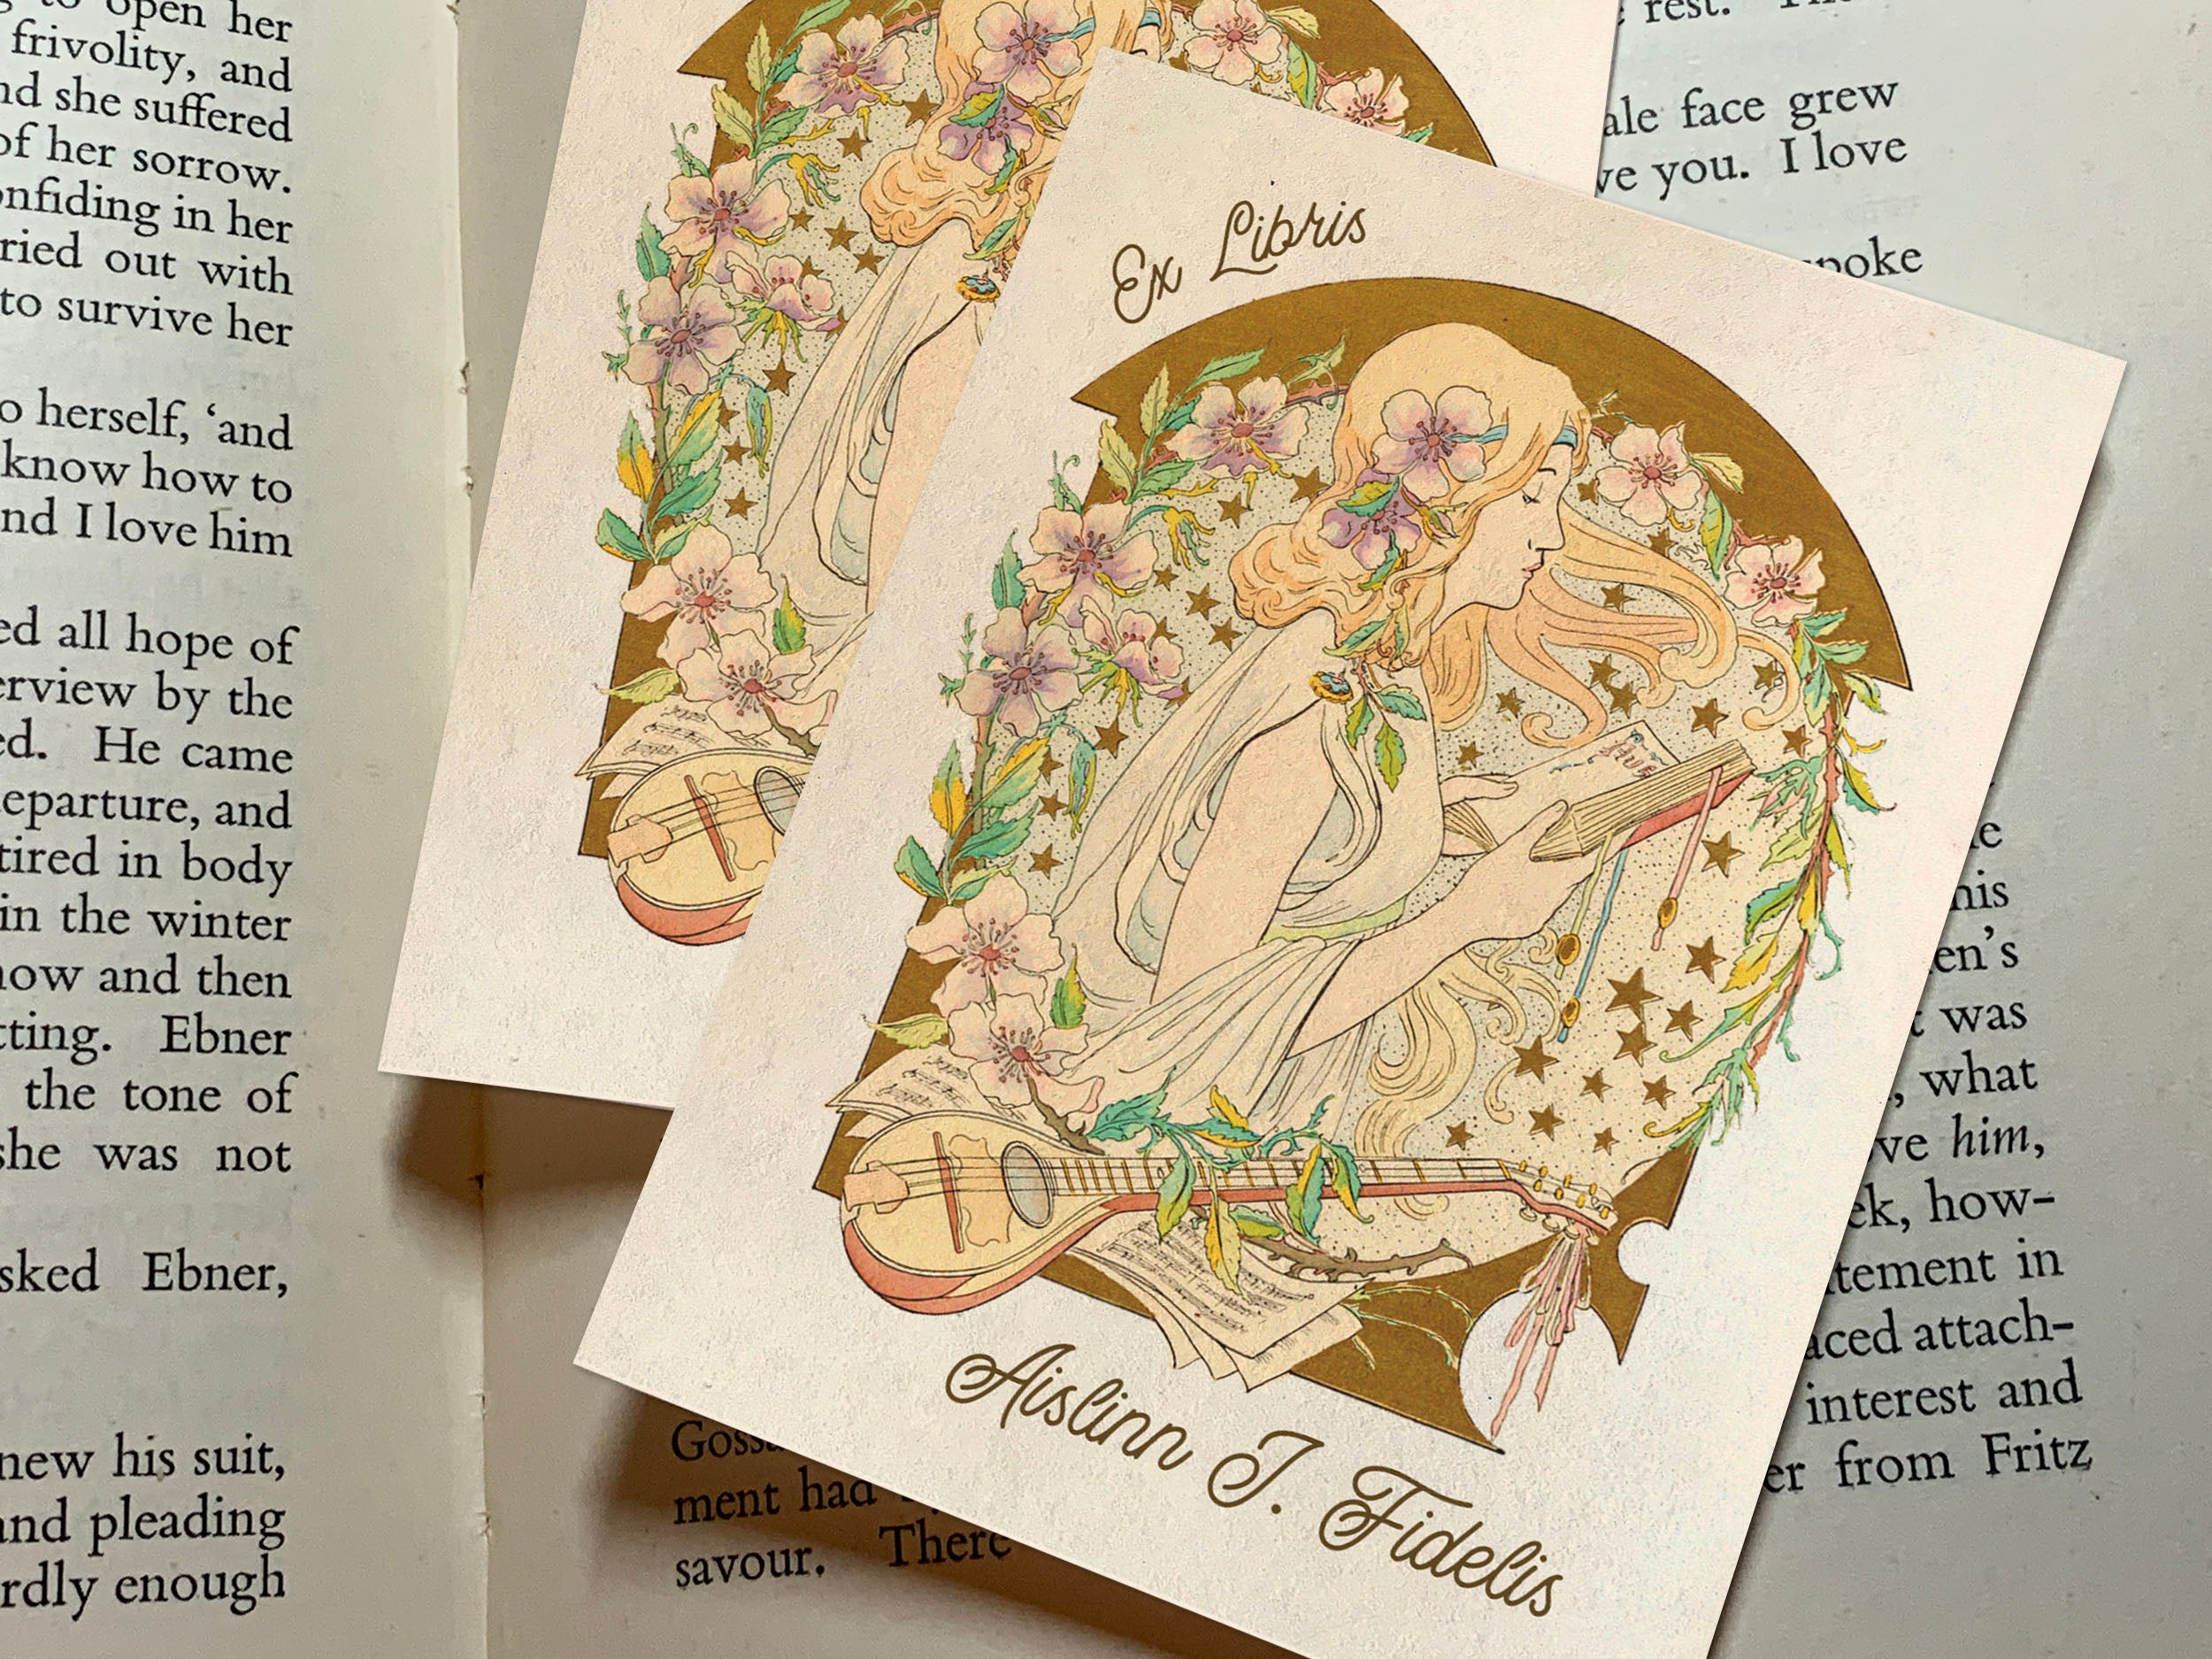 Musical Muse, Personalized Art Deco Ex-Libris Bookplates, Crafted on Traditional Gummed Paper, 4in x 3in, Set of 30